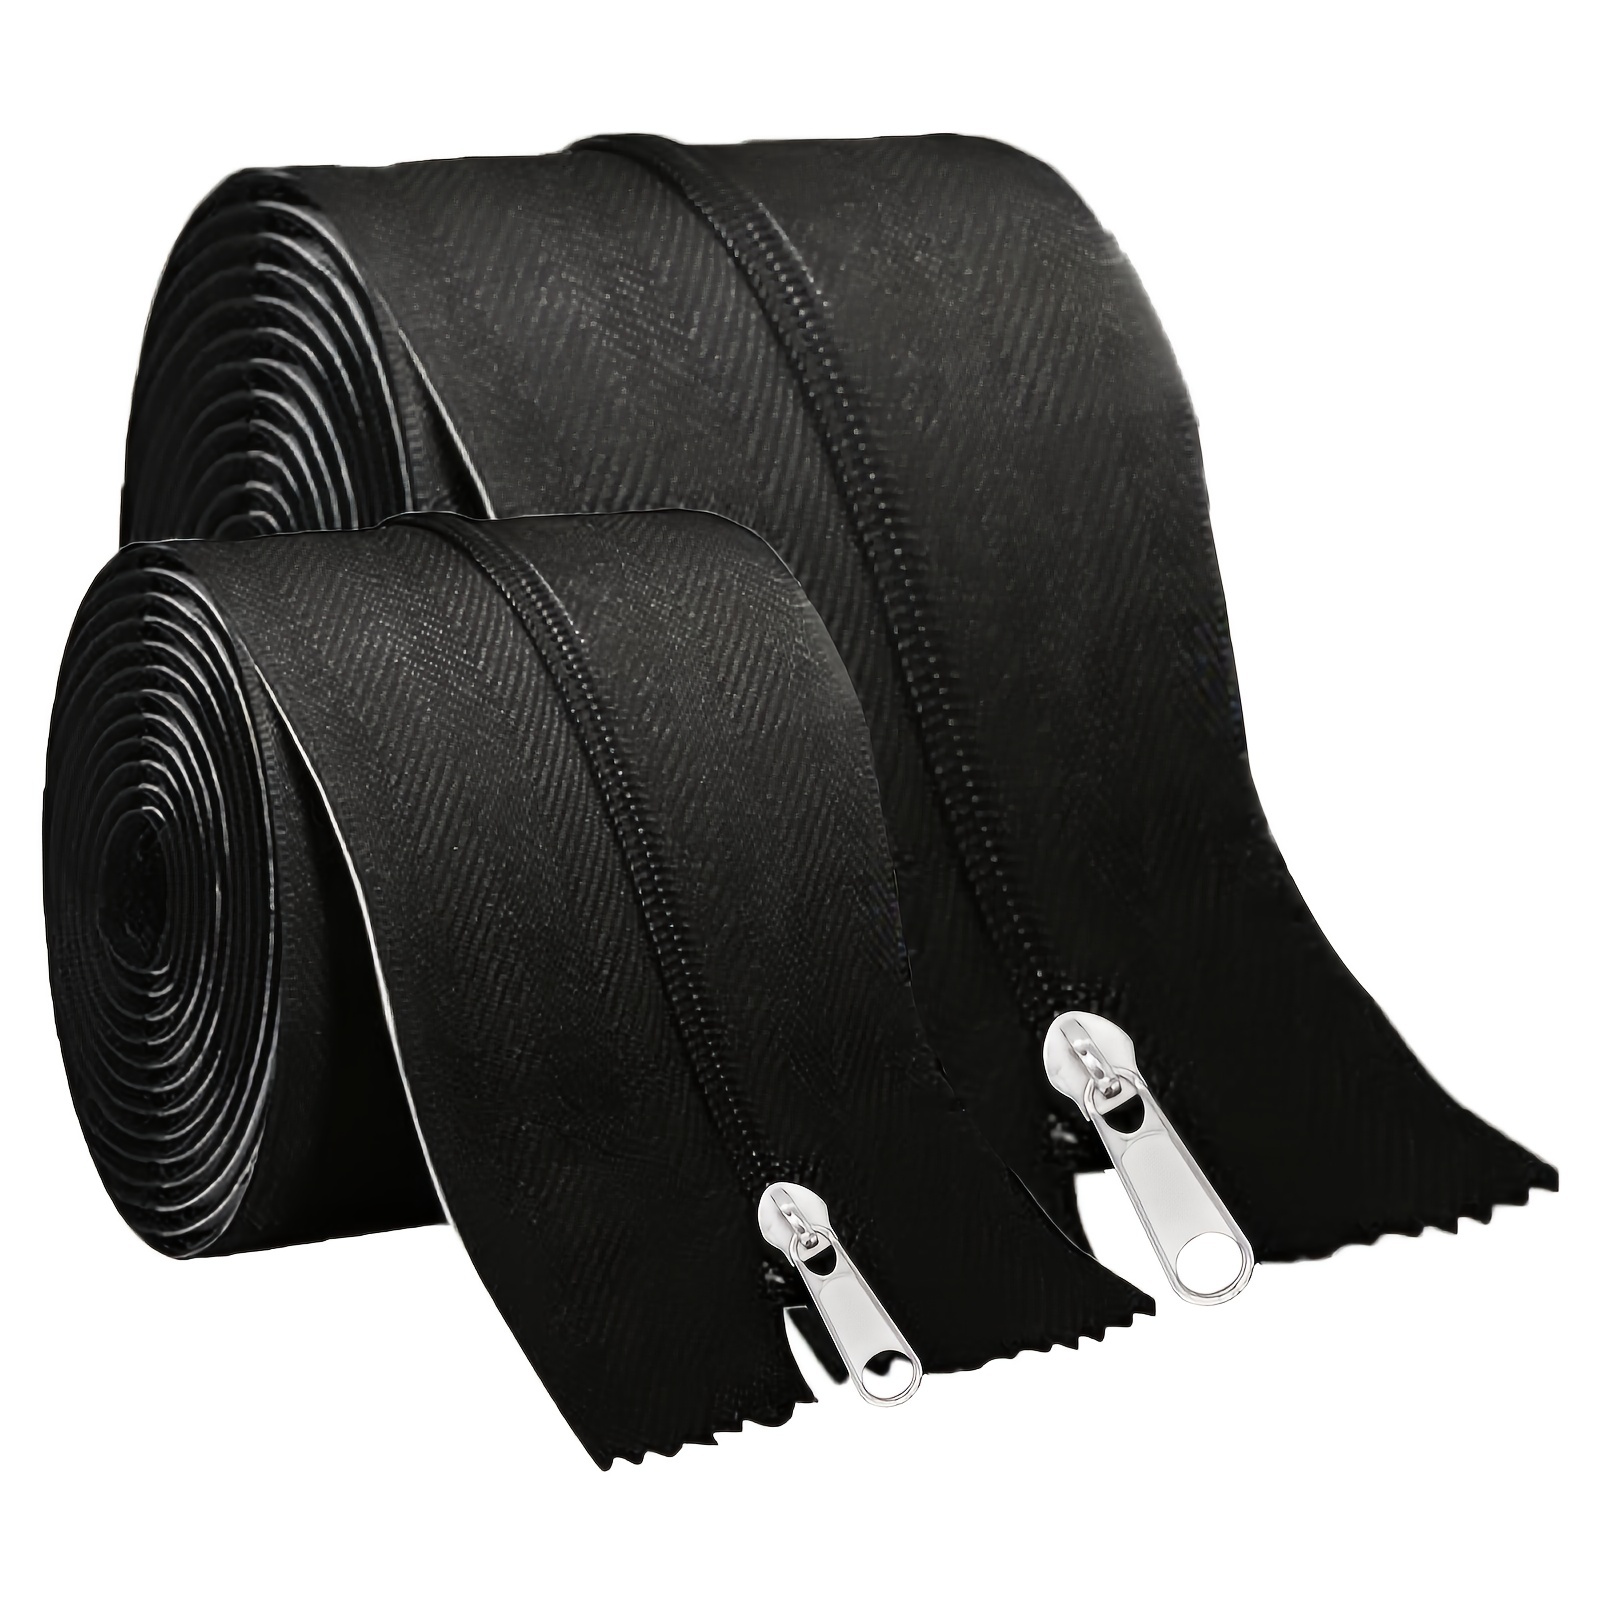 1pc Heavy Duty, Rust-resistant & Waterproof Black Zipper - Perfect for  Tarps & Convenient Adhesive Backing!